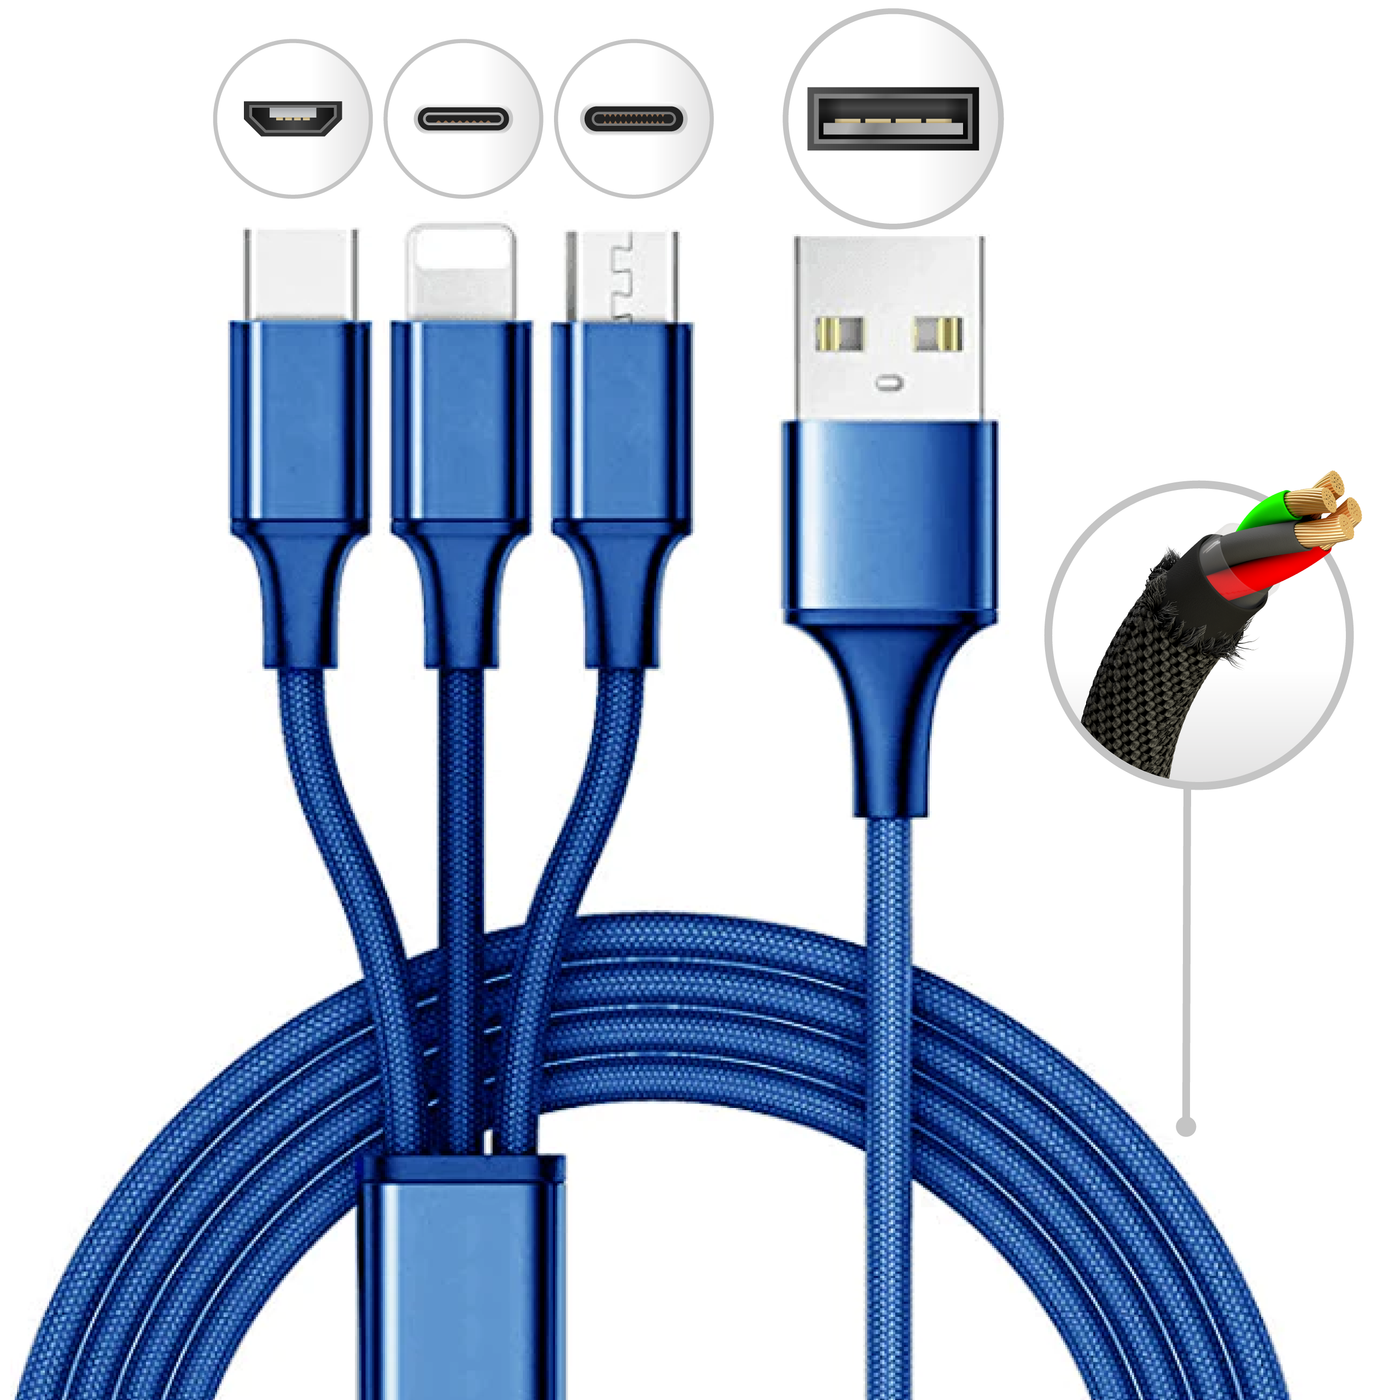 10 foot 3 in 1 USB Multi Charging Cable with Floor Display